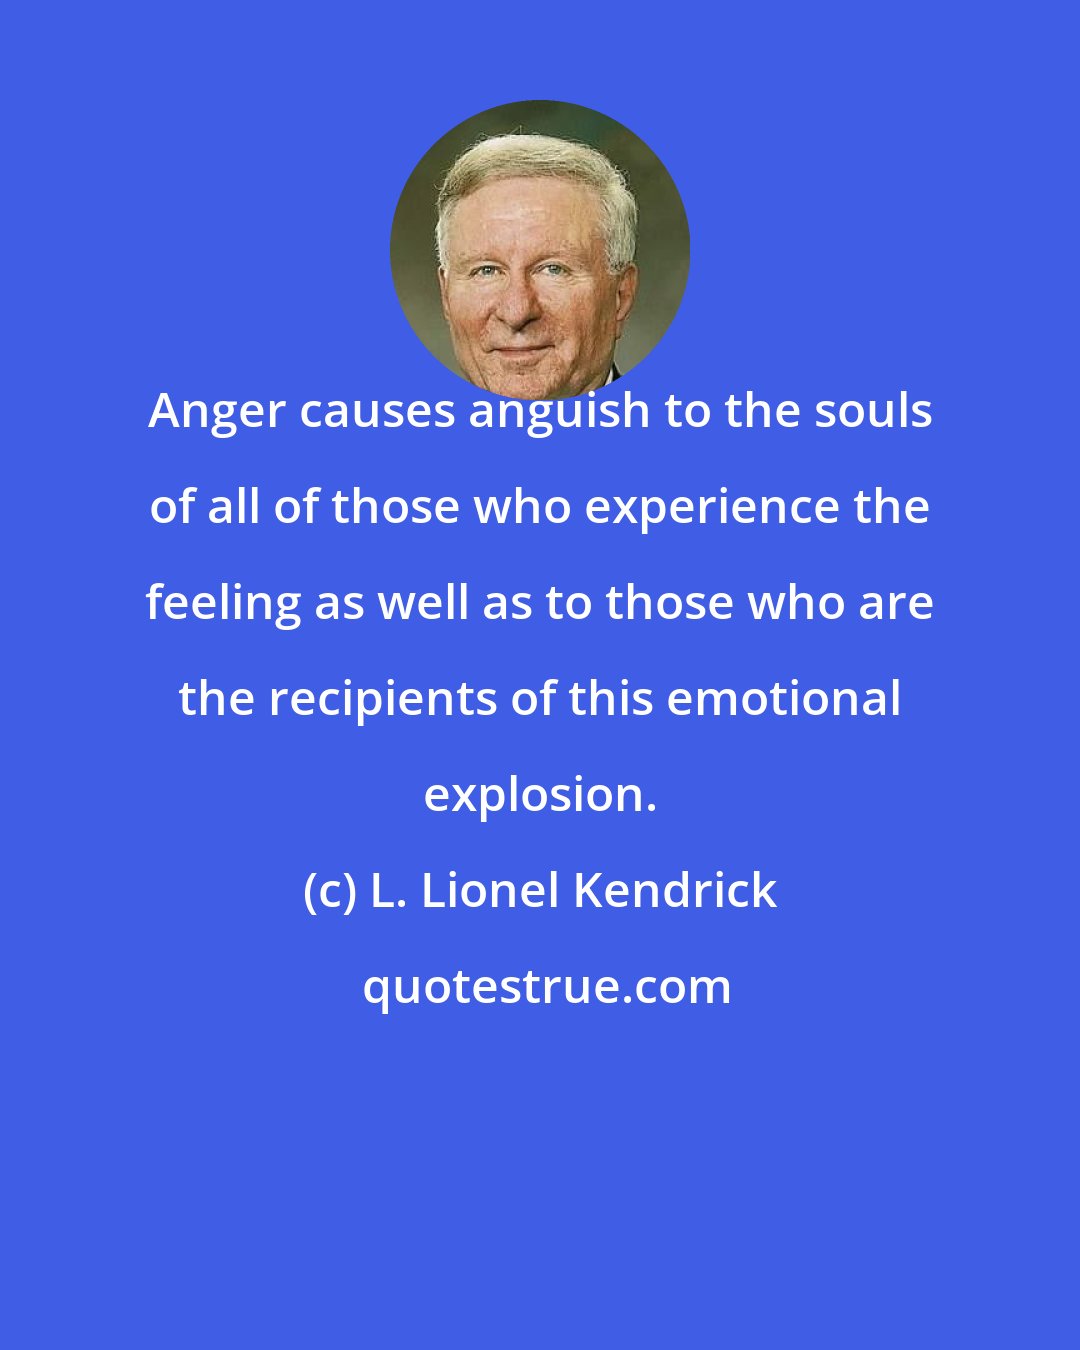 L. Lionel Kendrick: Anger causes anguish to the souls of all of those who experience the feeling as well as to those who are the recipients of this emotional explosion.